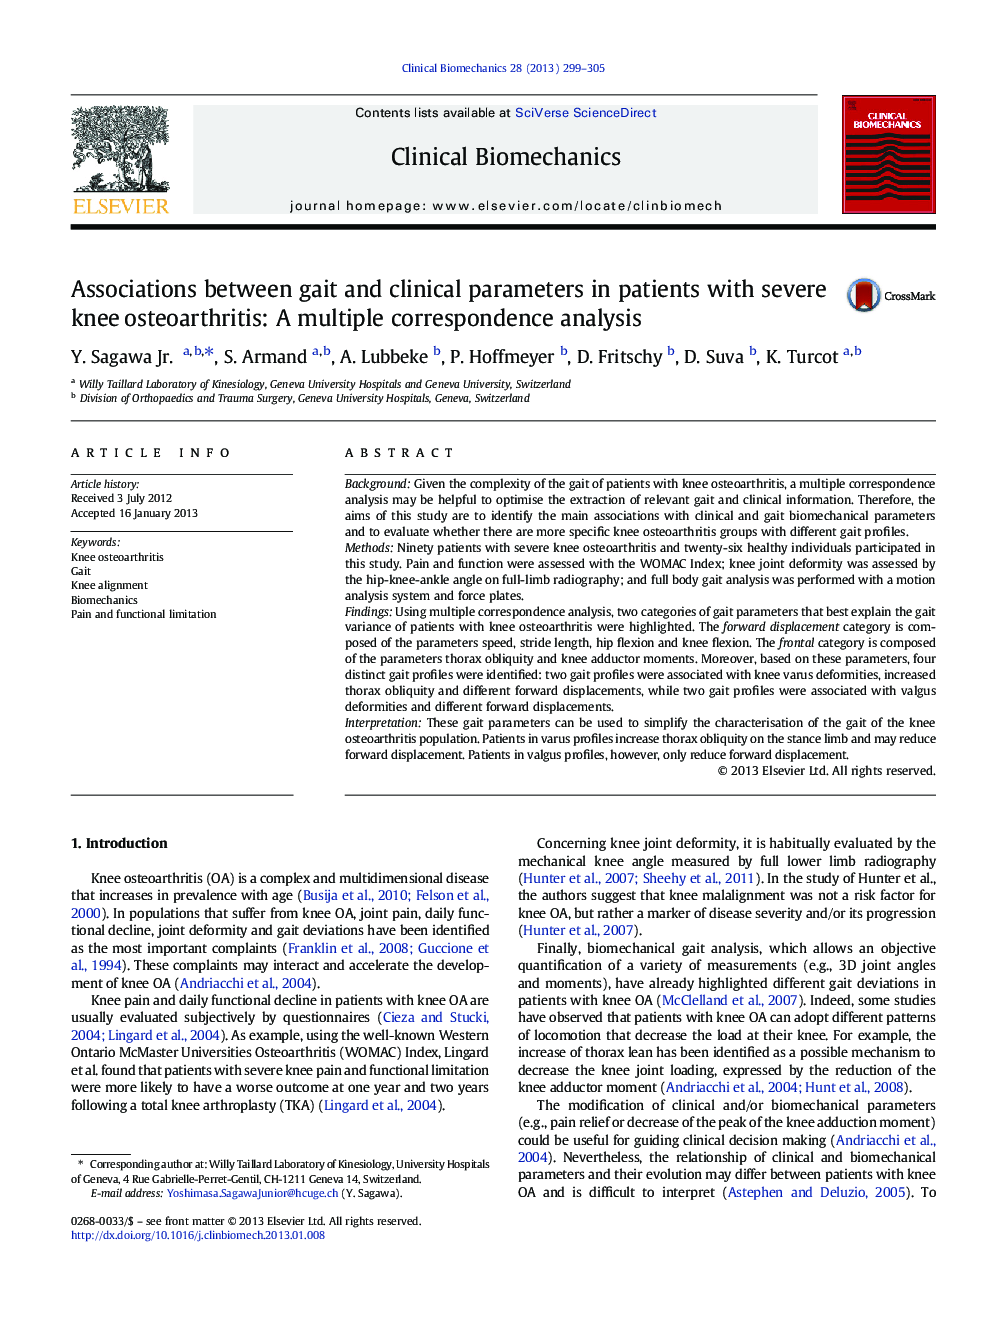 Associations between gait and clinical parameters in patients with severe knee osteoarthritis: A multiple correspondence analysis